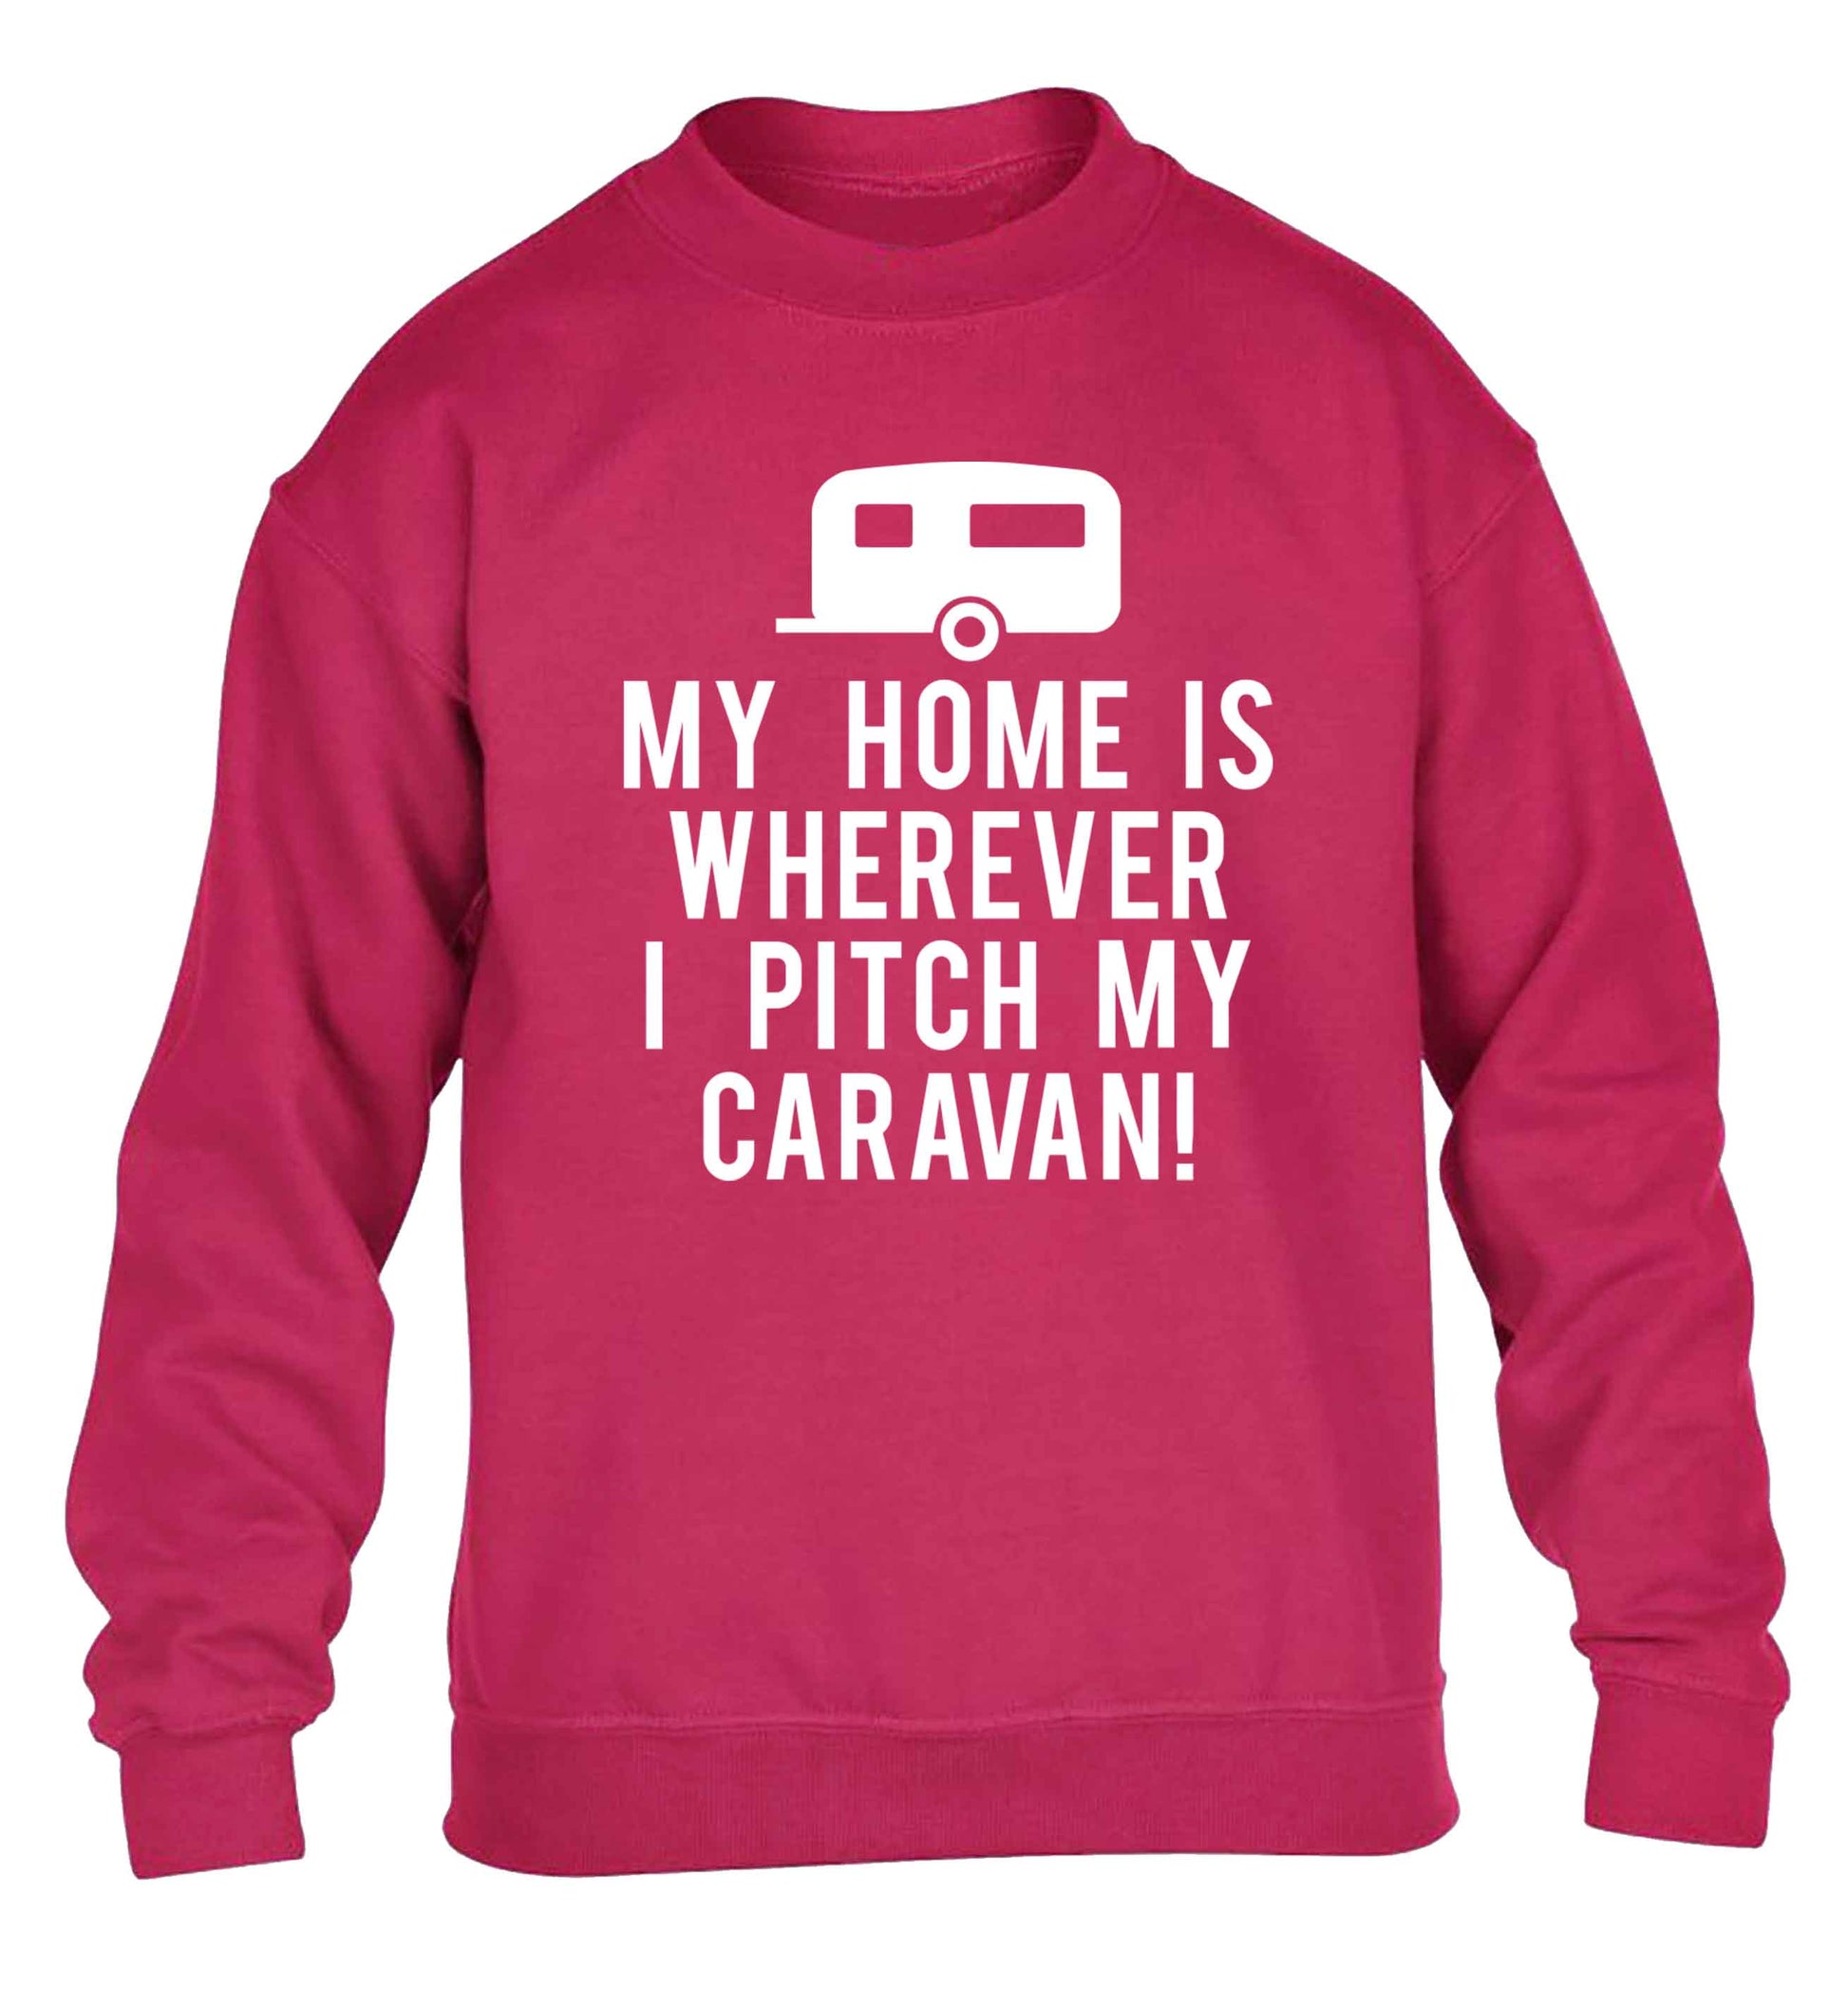 My home is wherever I pitch my caravan children's pink sweater 12-13 Years